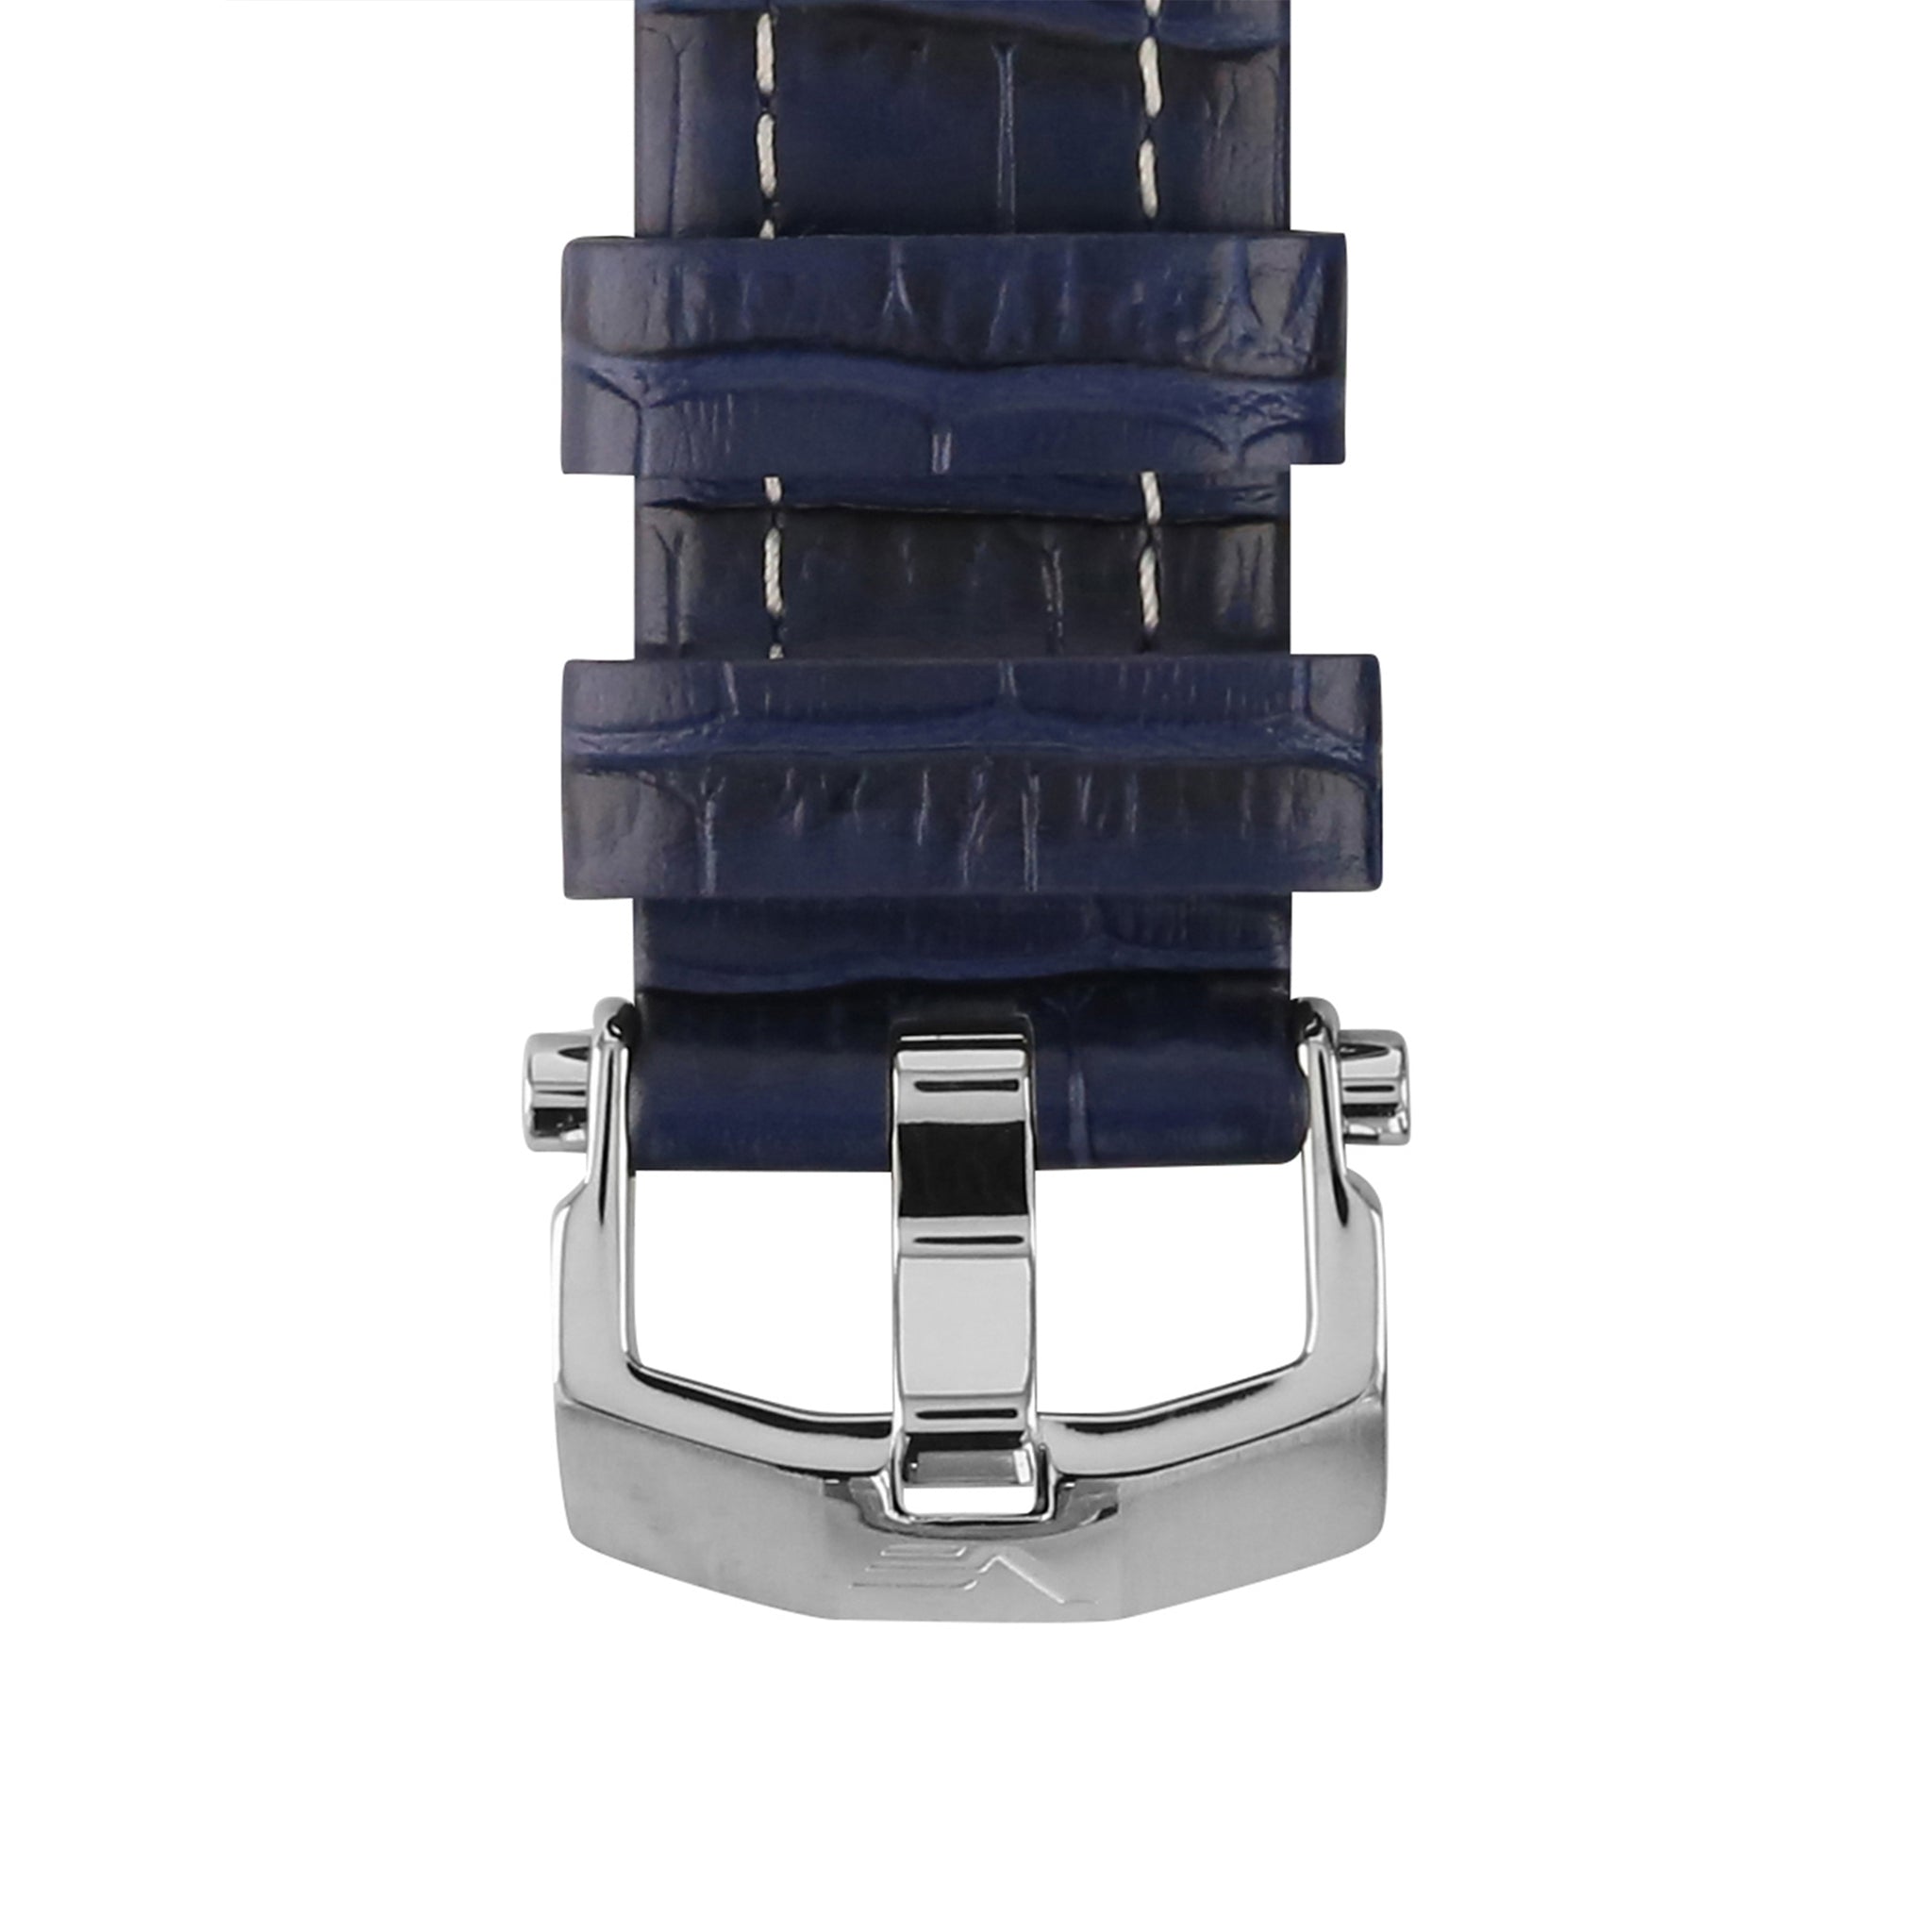 LUNOKHOD BLUE & WHITE LEATHER STRAP 25mm - POLISHED BUCKLE